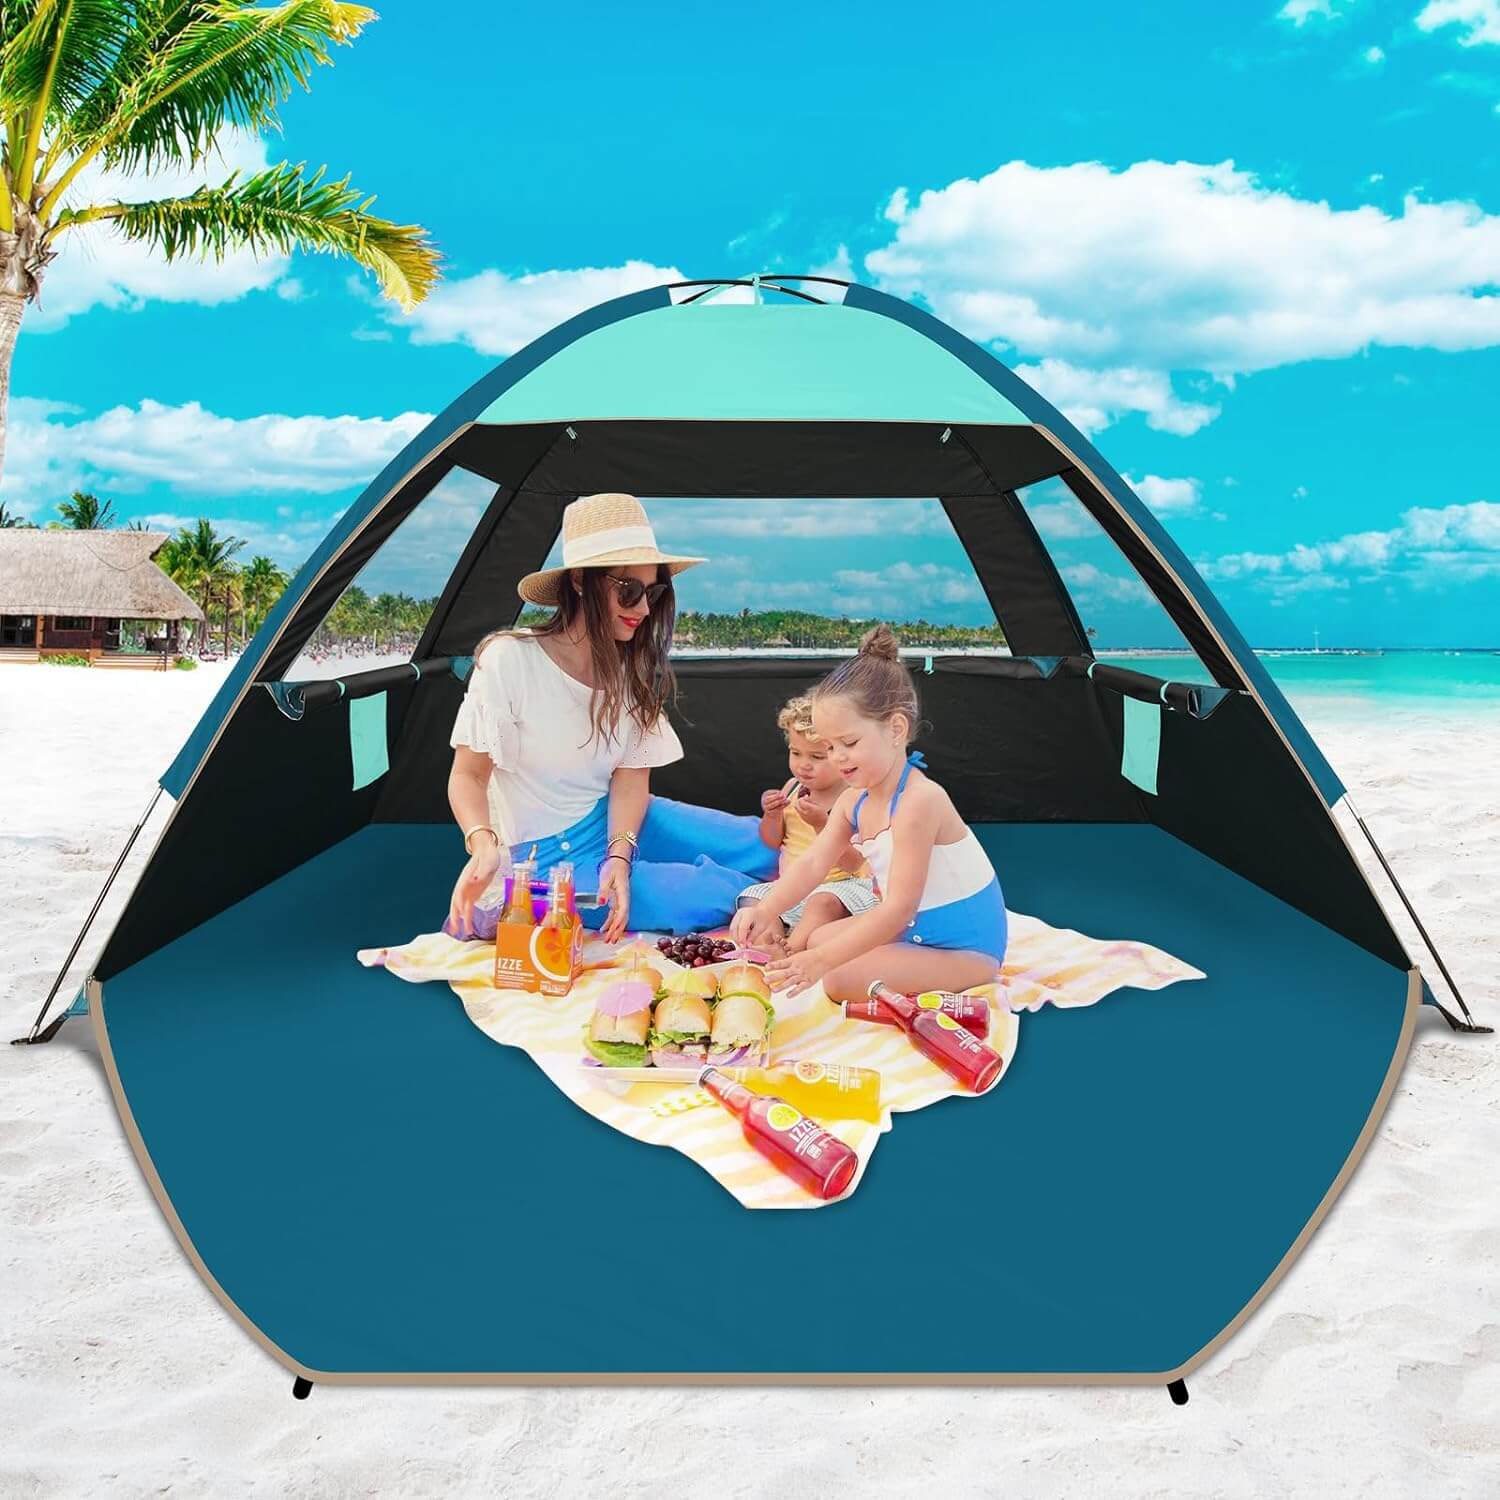 Commouds Portable UPF 100+ Beach Tent with Dark Shelter Technology [Turquoise]